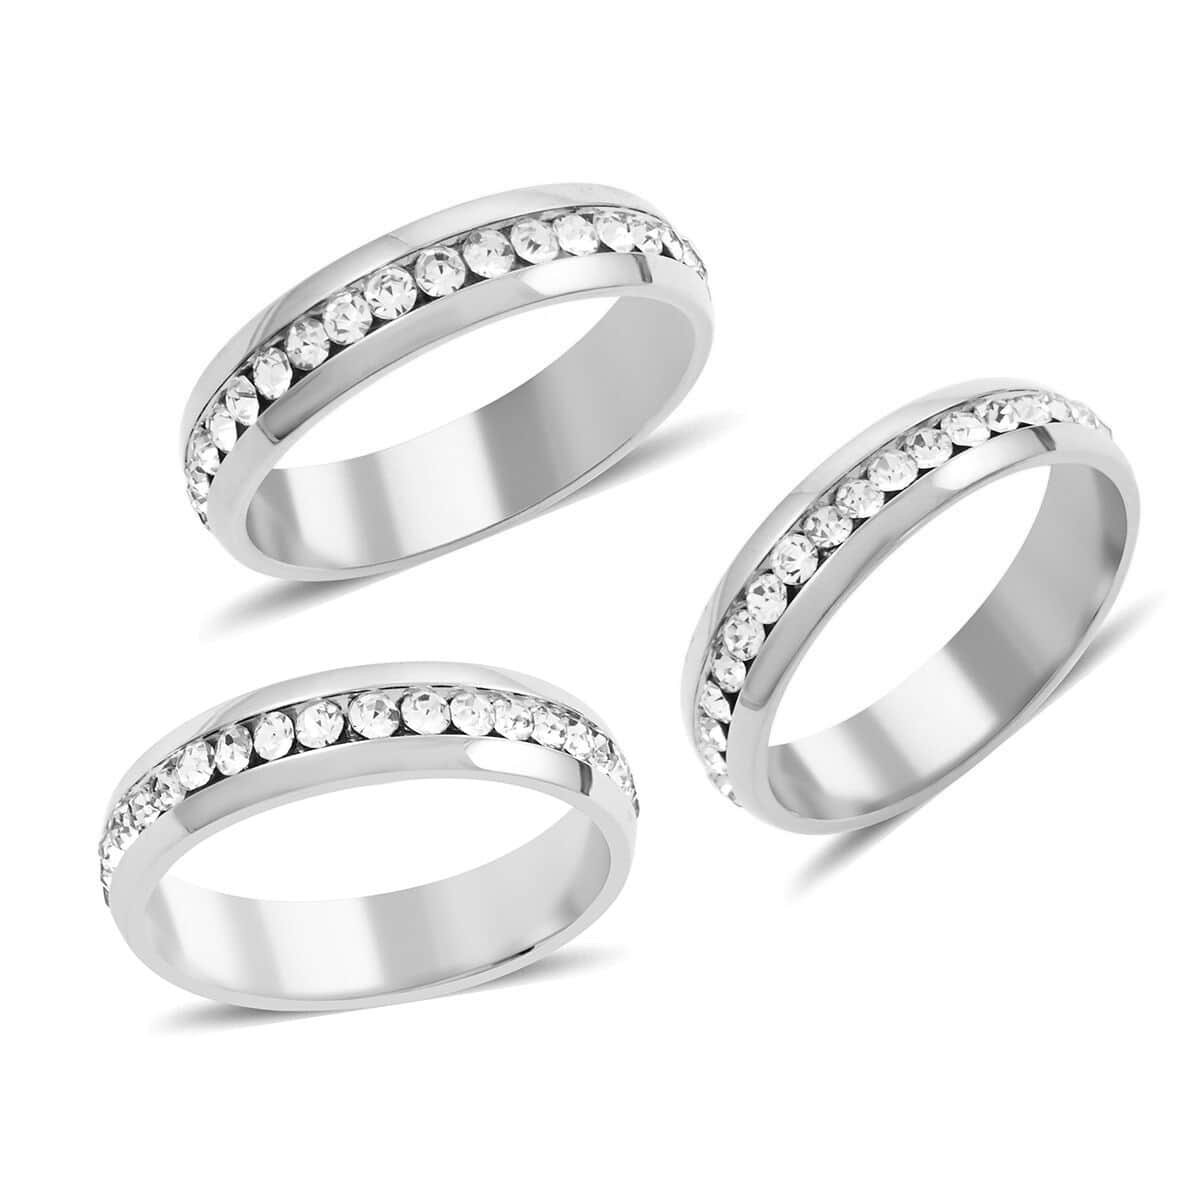 Buy Austrian Crystal Set of 3 Ring (Size 7.0) in ION Plated YG, RG